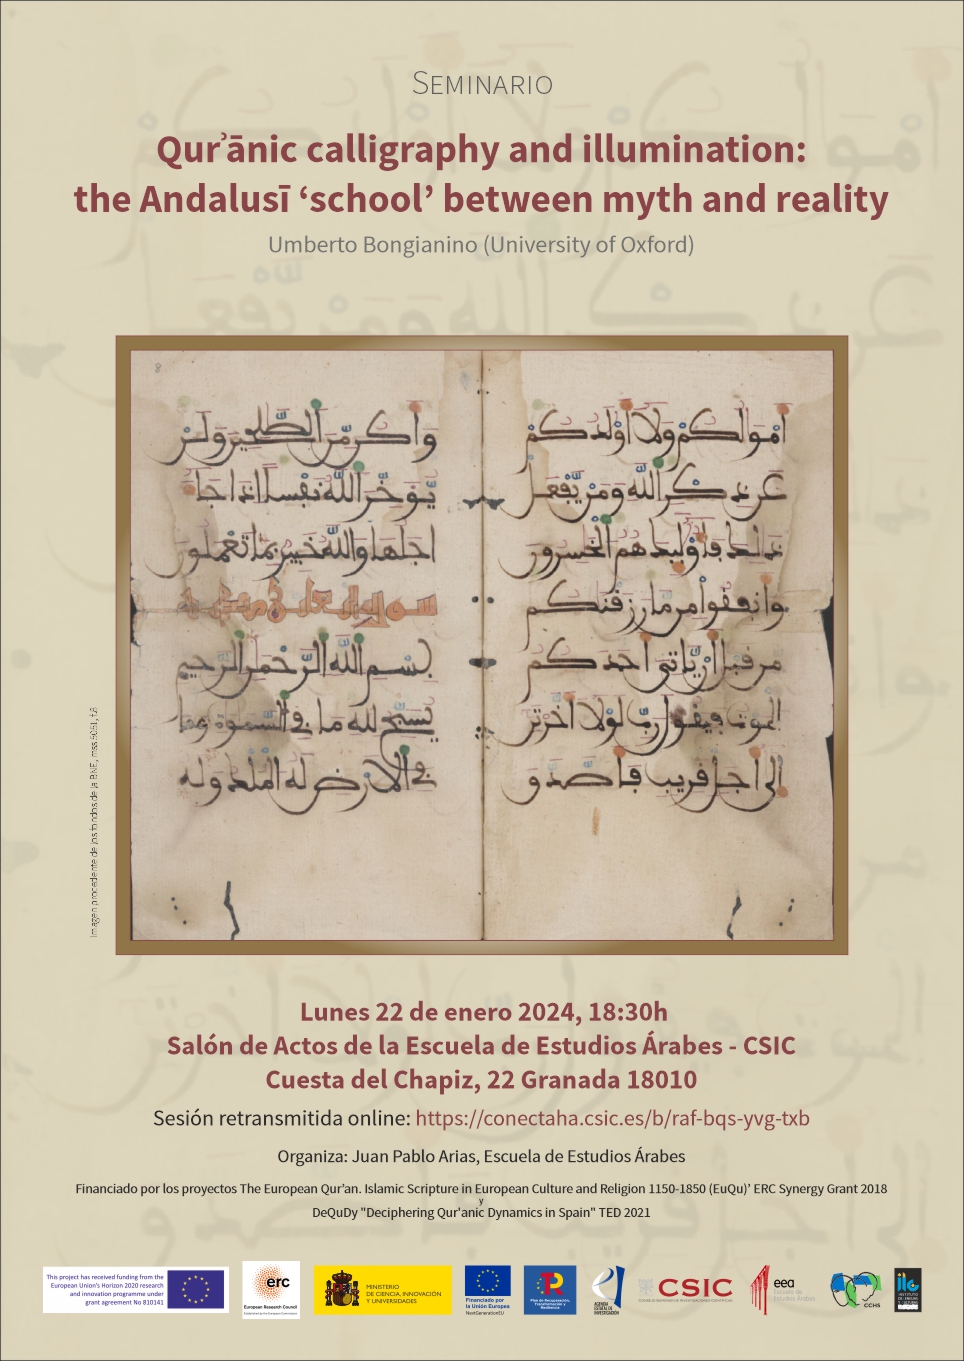 Seminario "Qurʾānic calligraphy and illumination: the Andalusī ‘school’ between myth and reality"